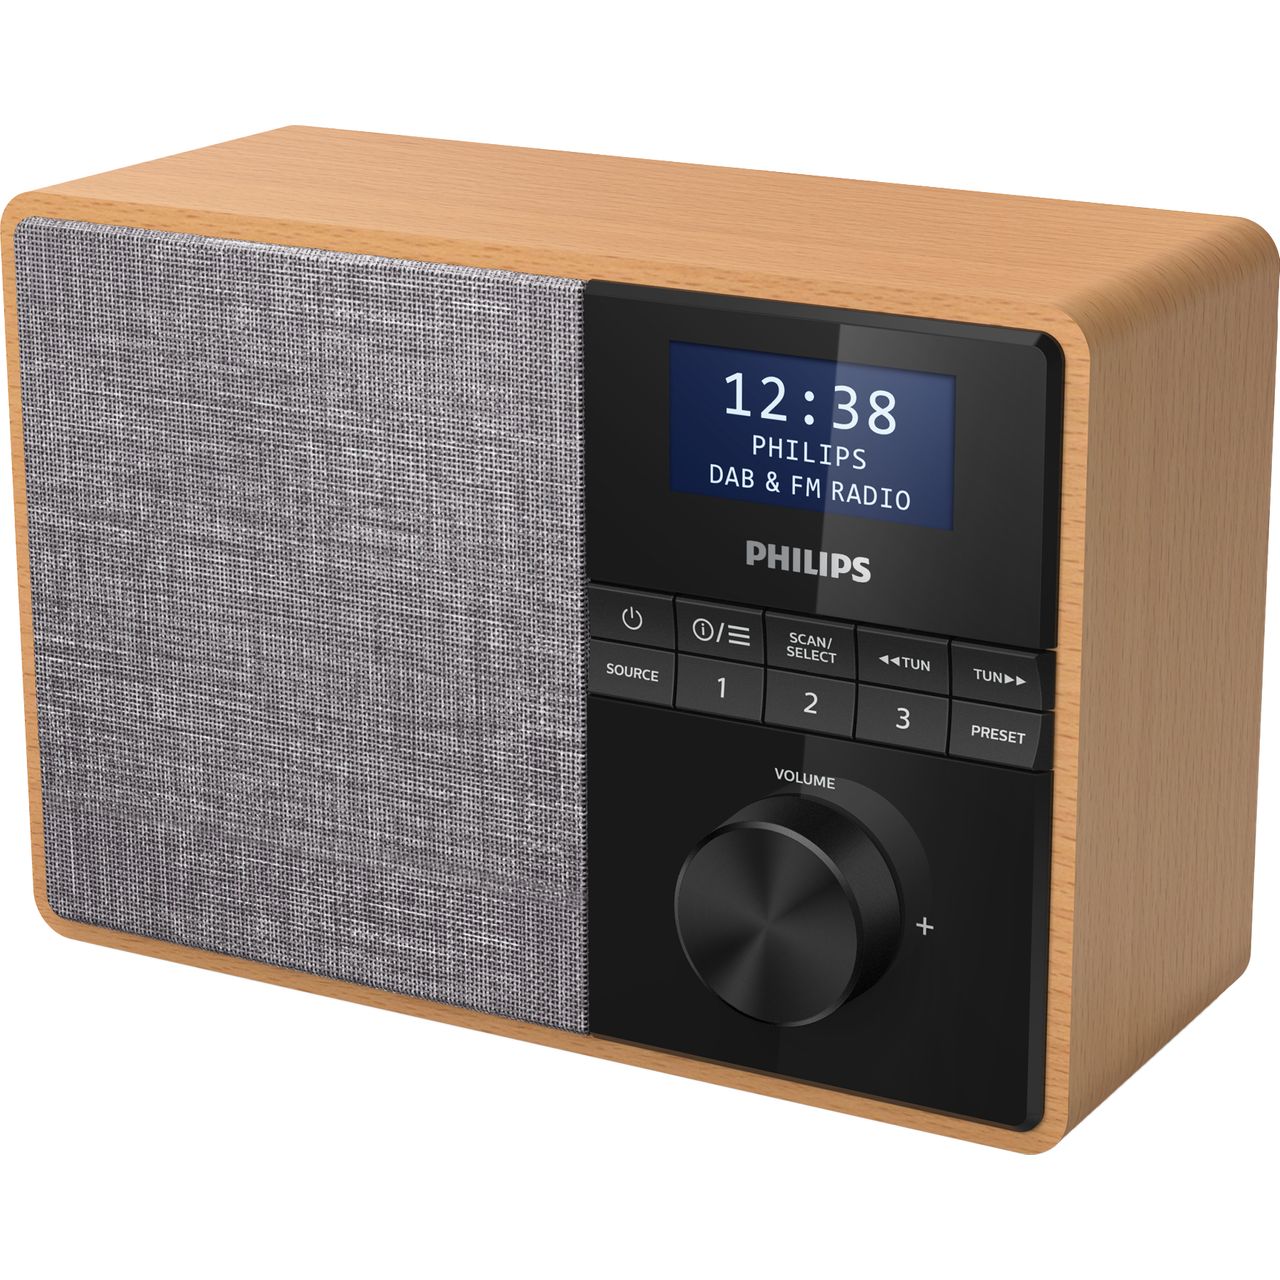 Philips TAR5505 DAB+ Digital Radio with FM Tuner Review